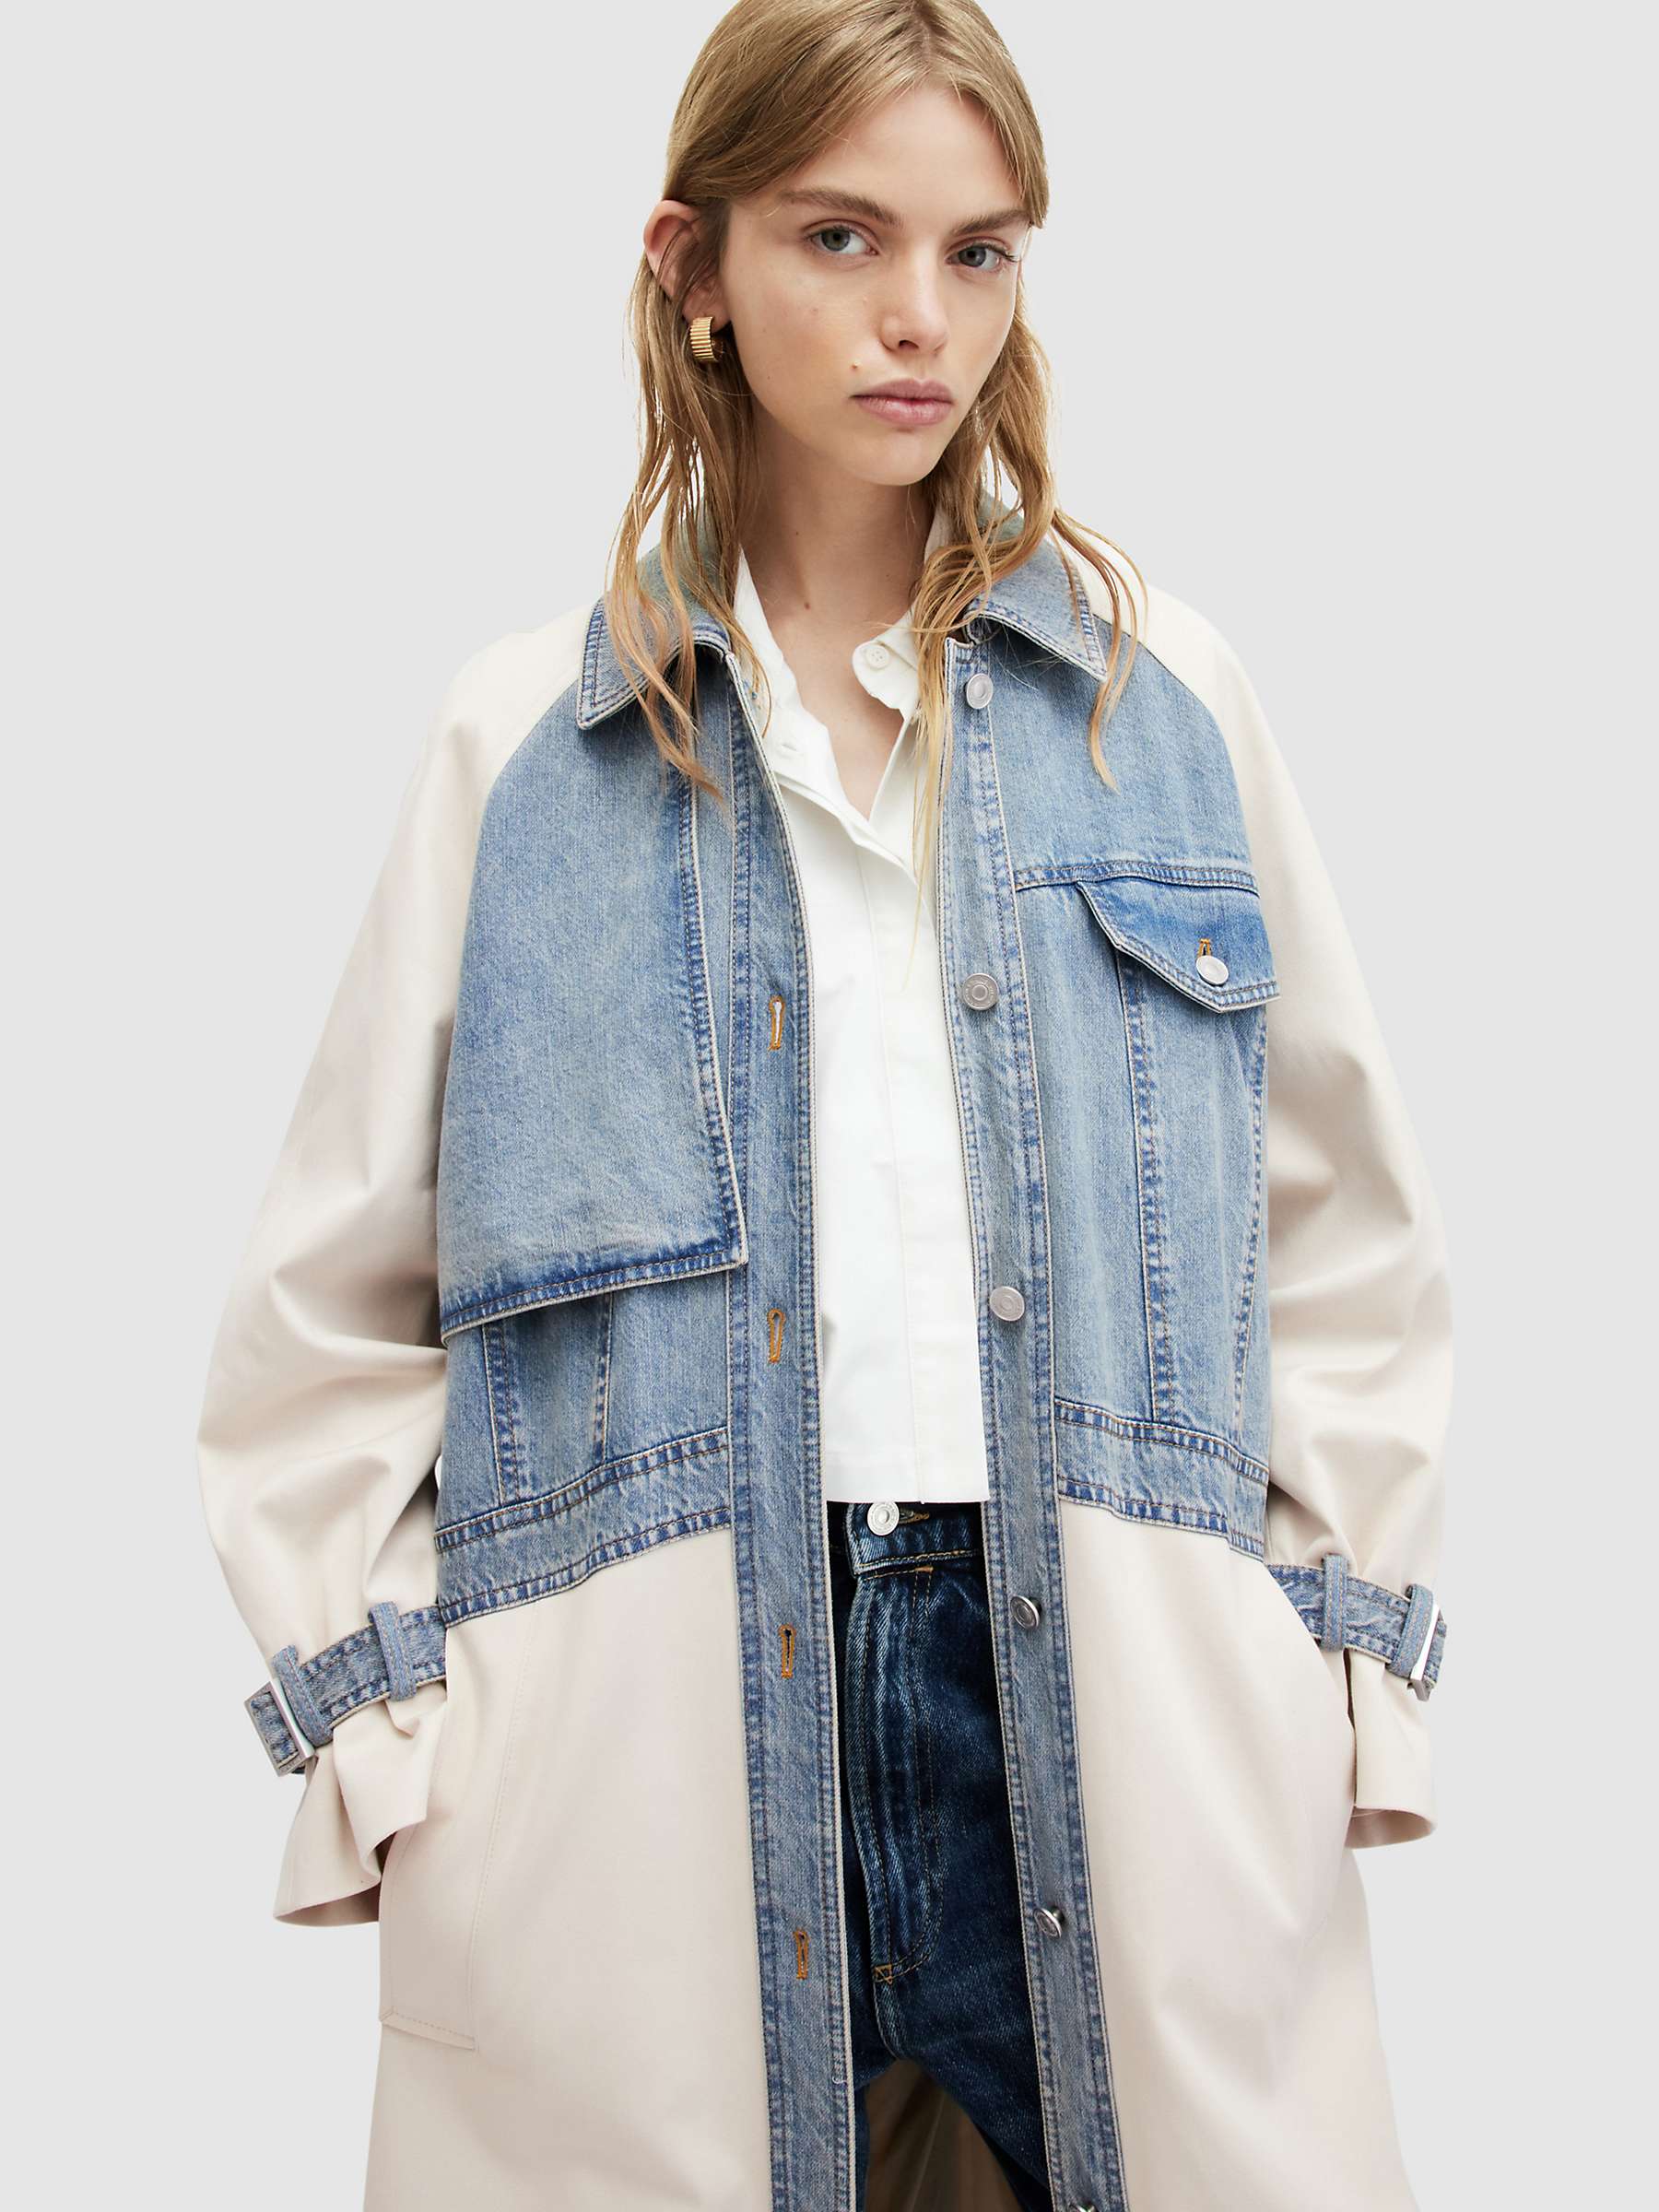 Buy AllSaints Dayly Bi-Material Trench Coat, Stone White/Blue Online at johnlewis.com